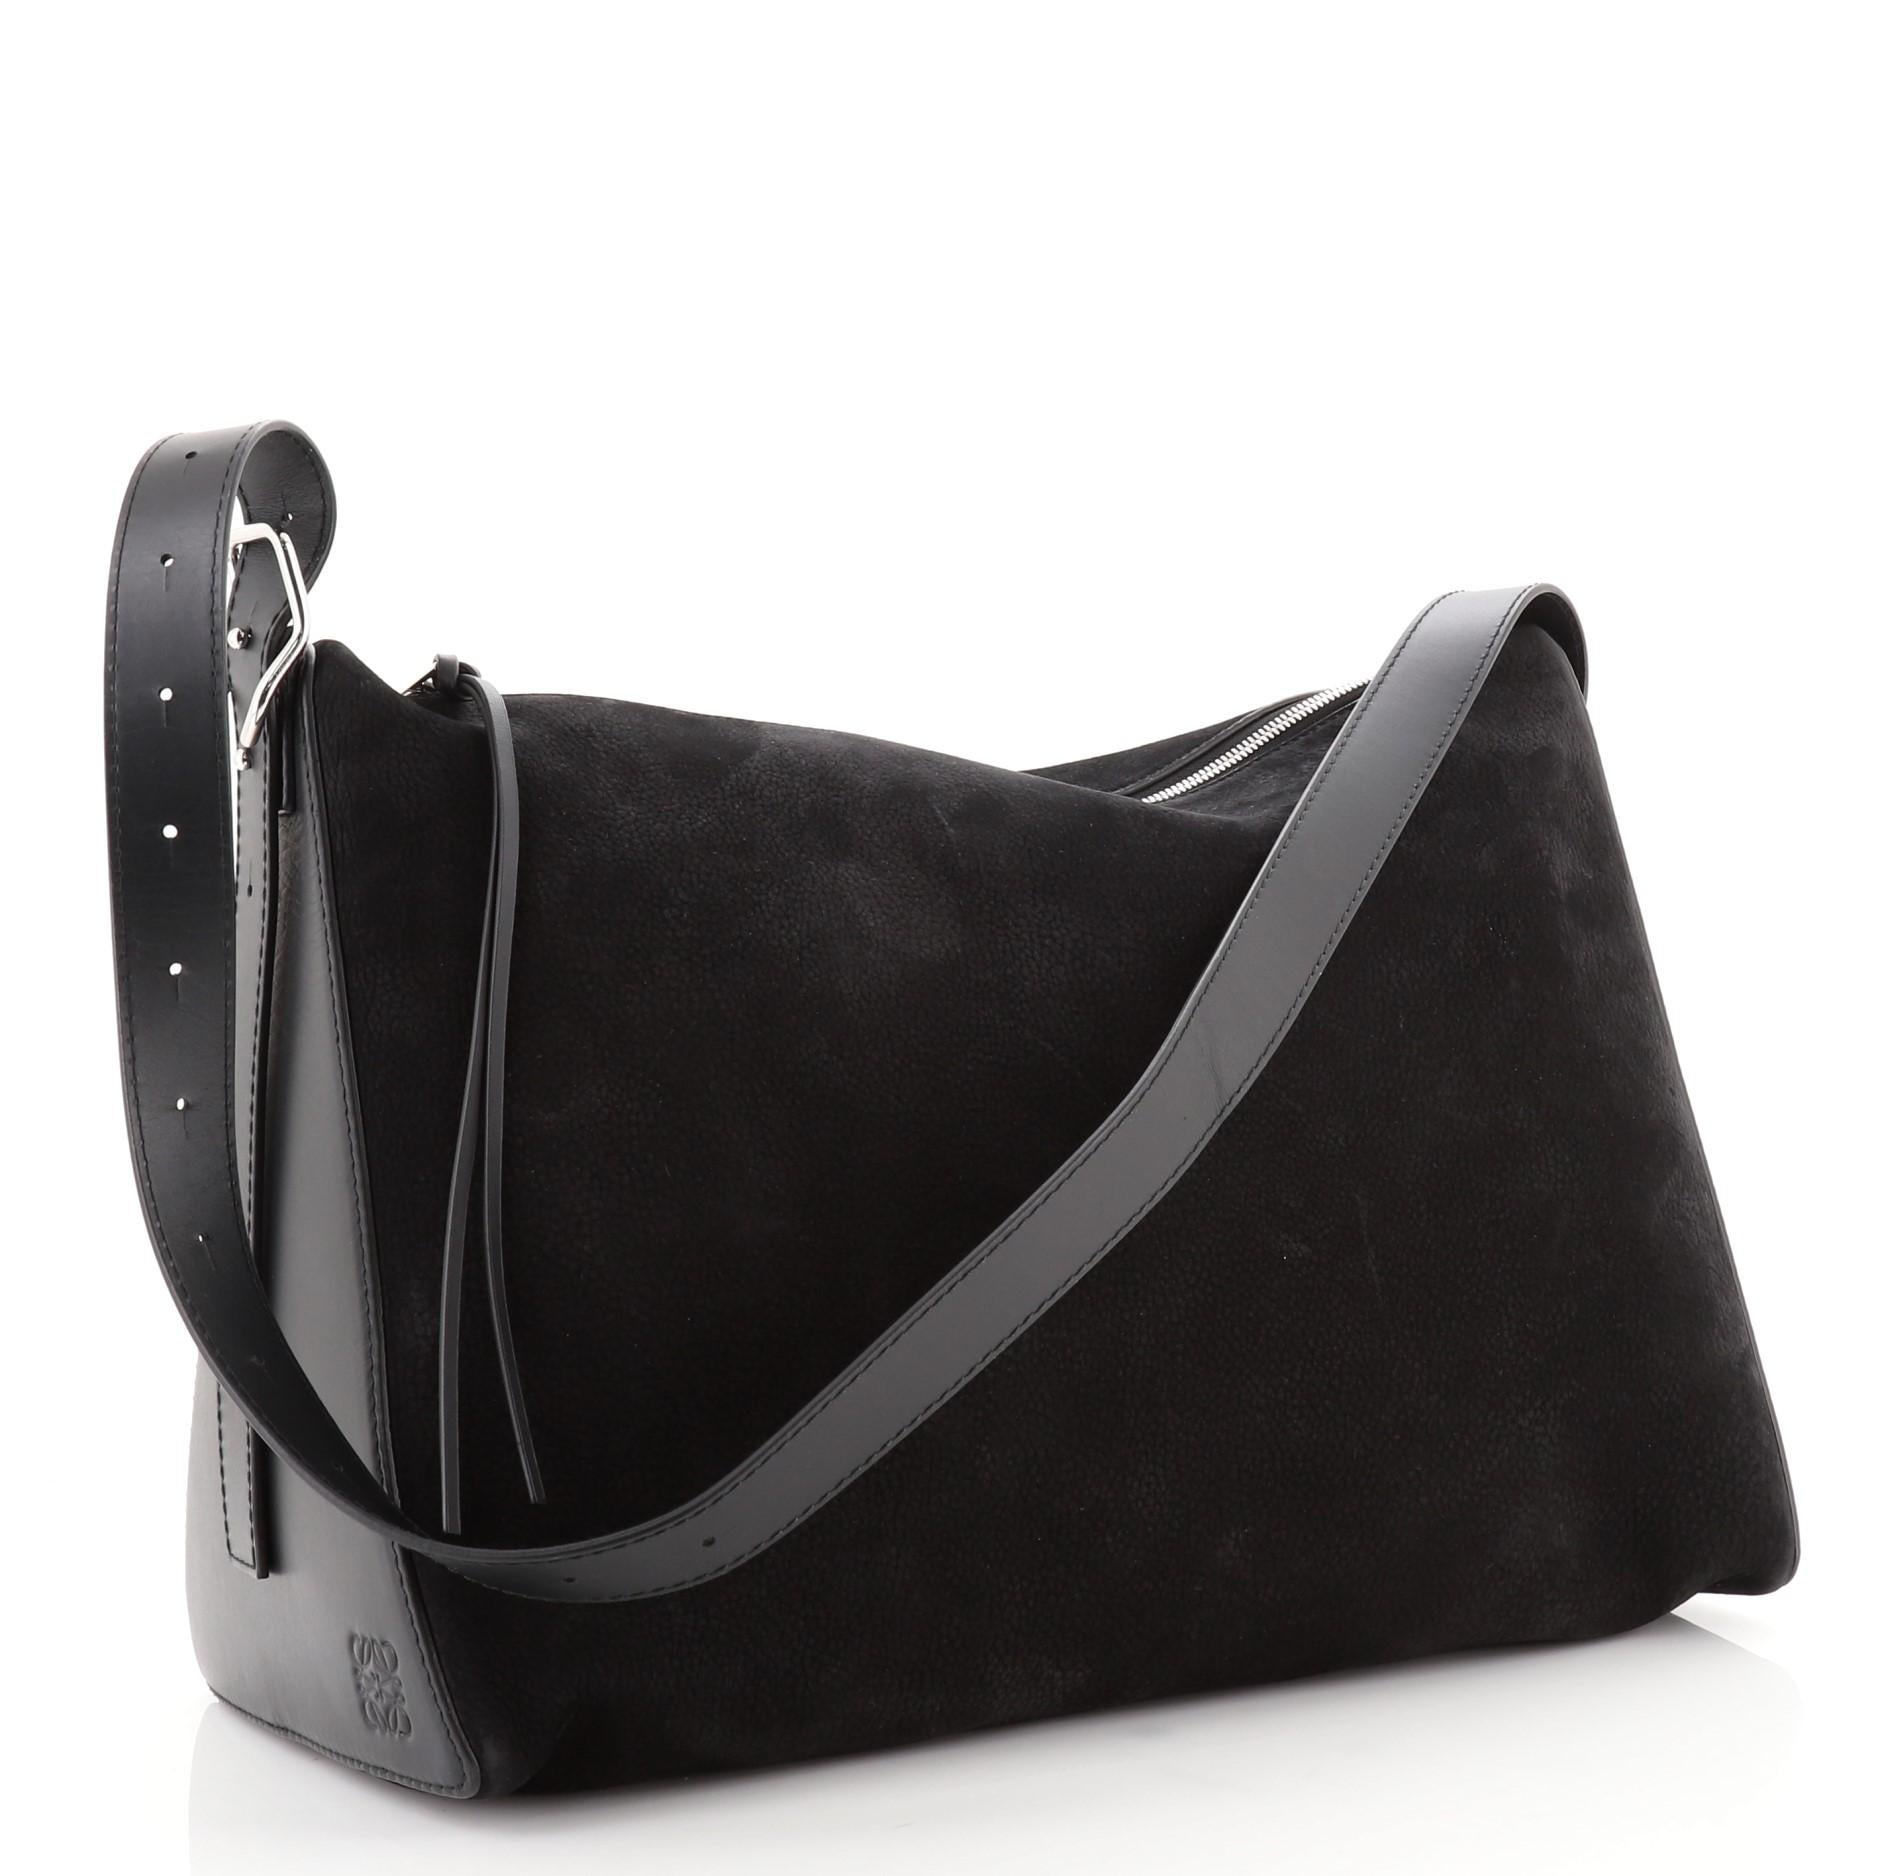 Loewe Berlingo Bag Nubuck with Calfskin Large
Black

Condition Details: Moderate wear and scuffs on exterior and strap, small indentations on sides. Minor wear in interior, scratches on hardware.

51941MSC

Height 